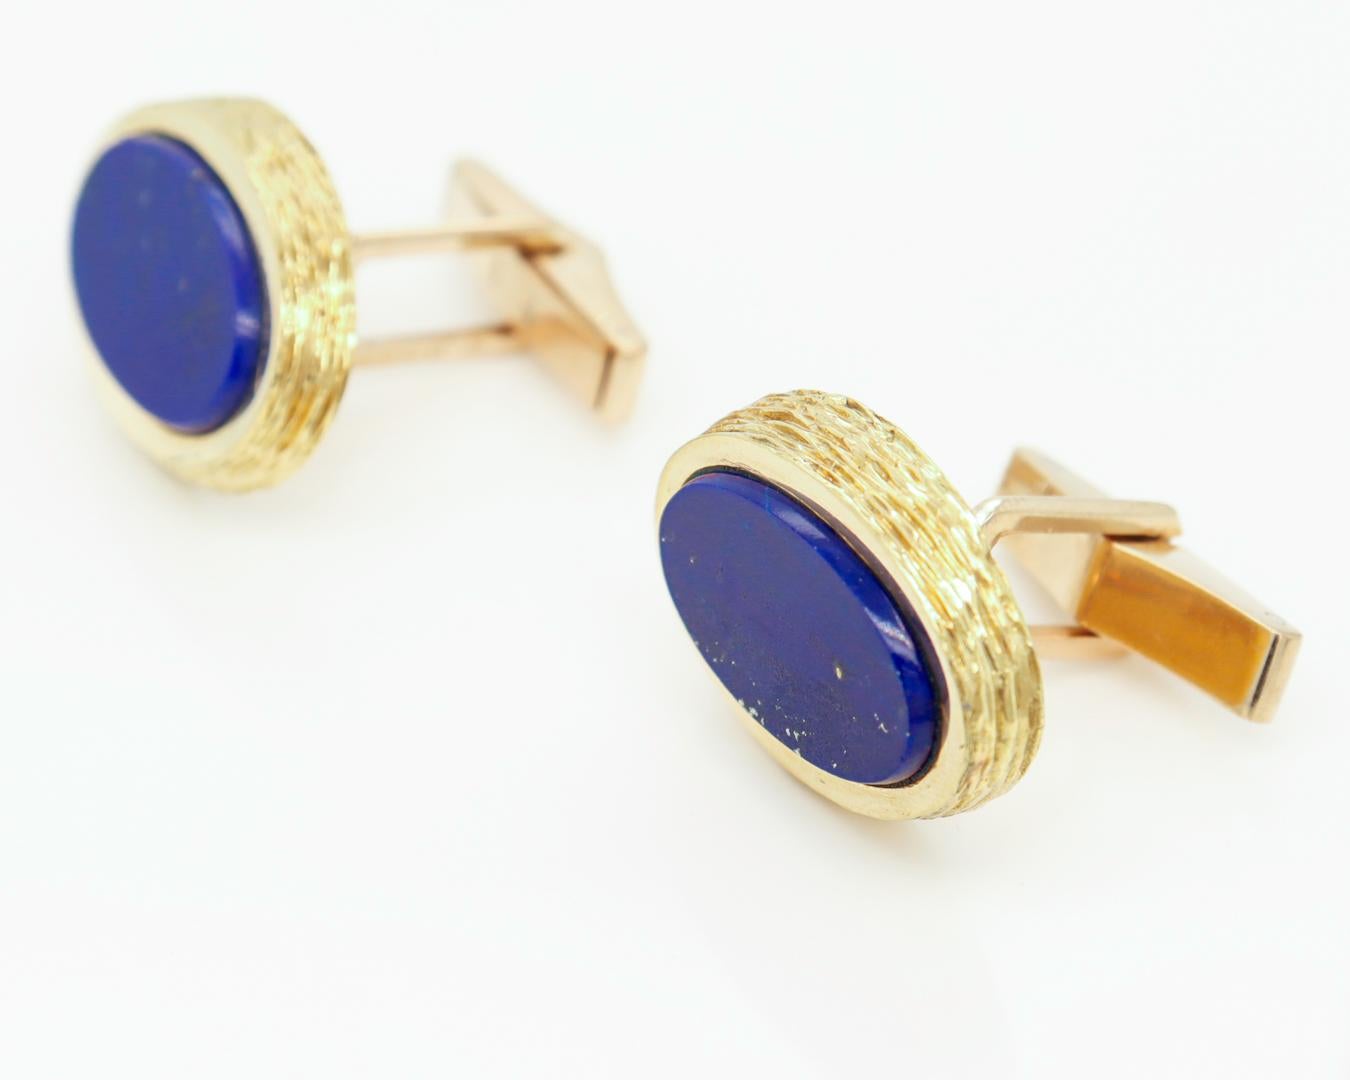 Pair of English Mid-Century Modern 18k Gold & Lapis Cufflinks by Kutchinsky For Sale 4